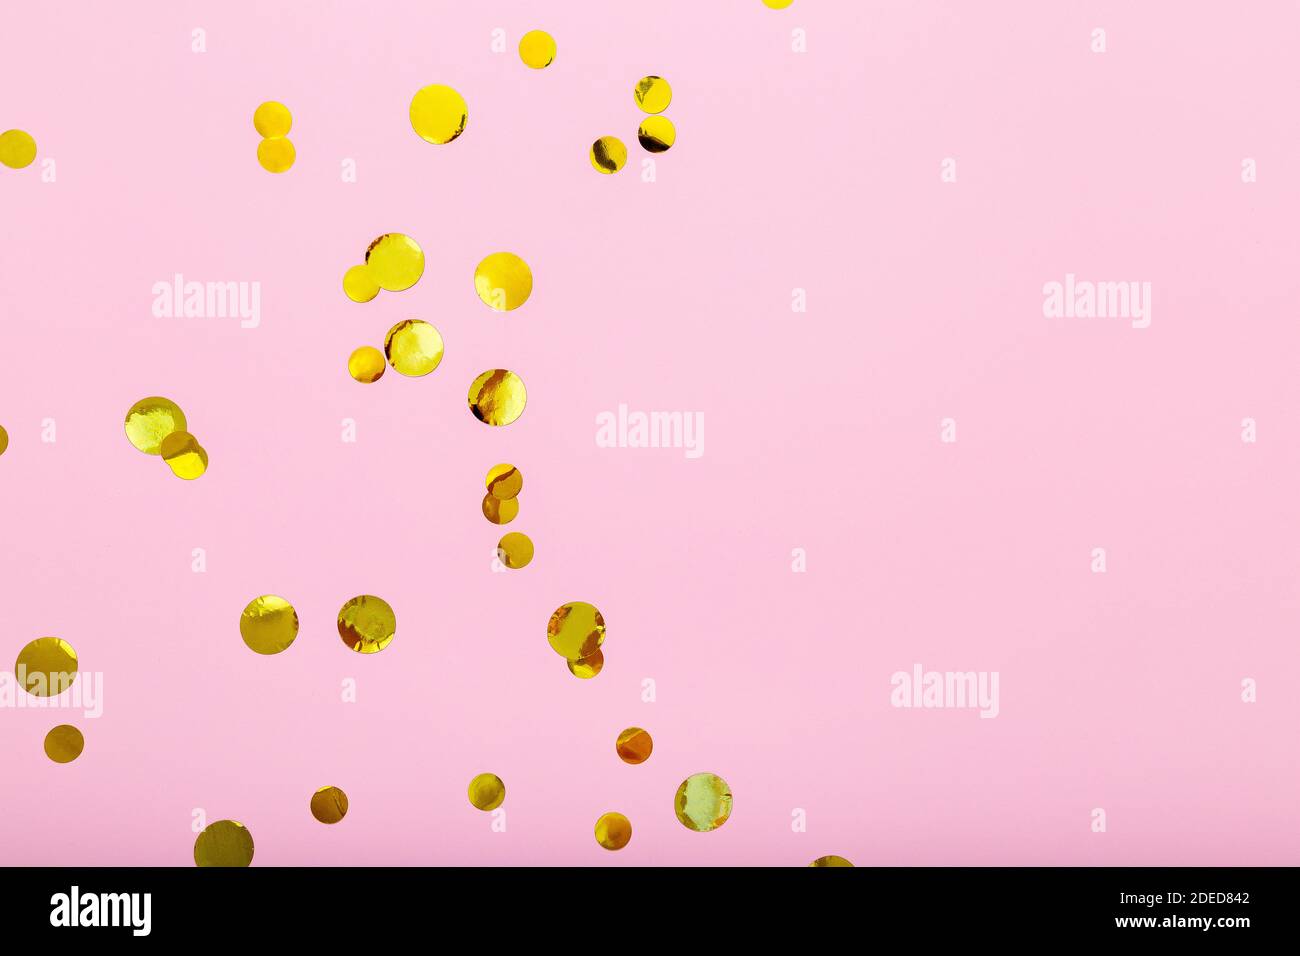 Gold confetti sparkles frame on pink background. Flat lay, top view festive backdrop with copy space. Celebration concept. Stock Photo